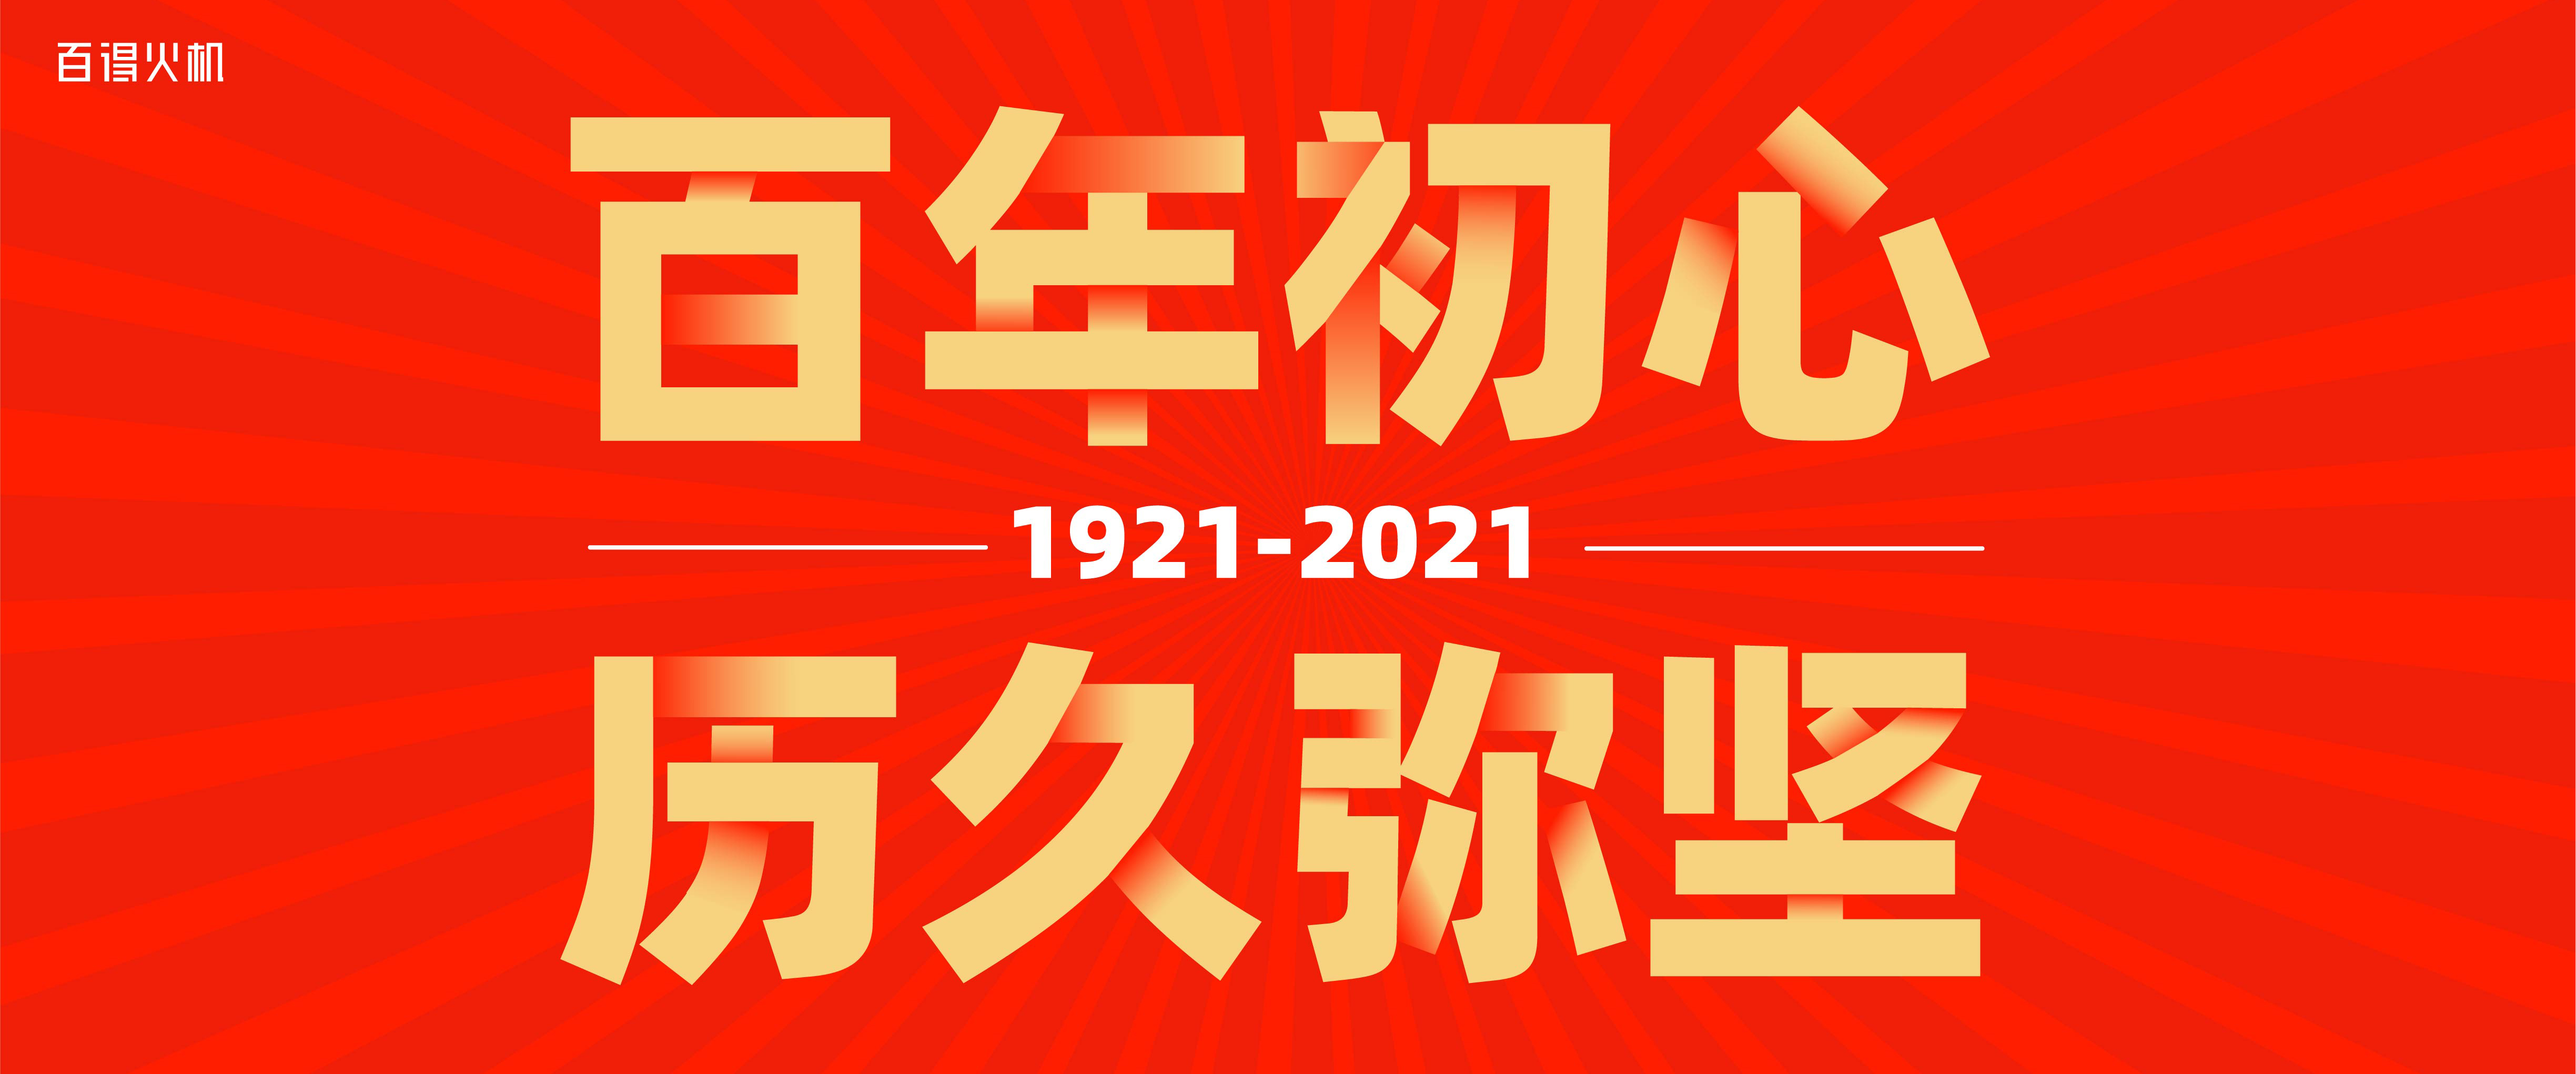 Happy 100th birthday of the Communist Party of China